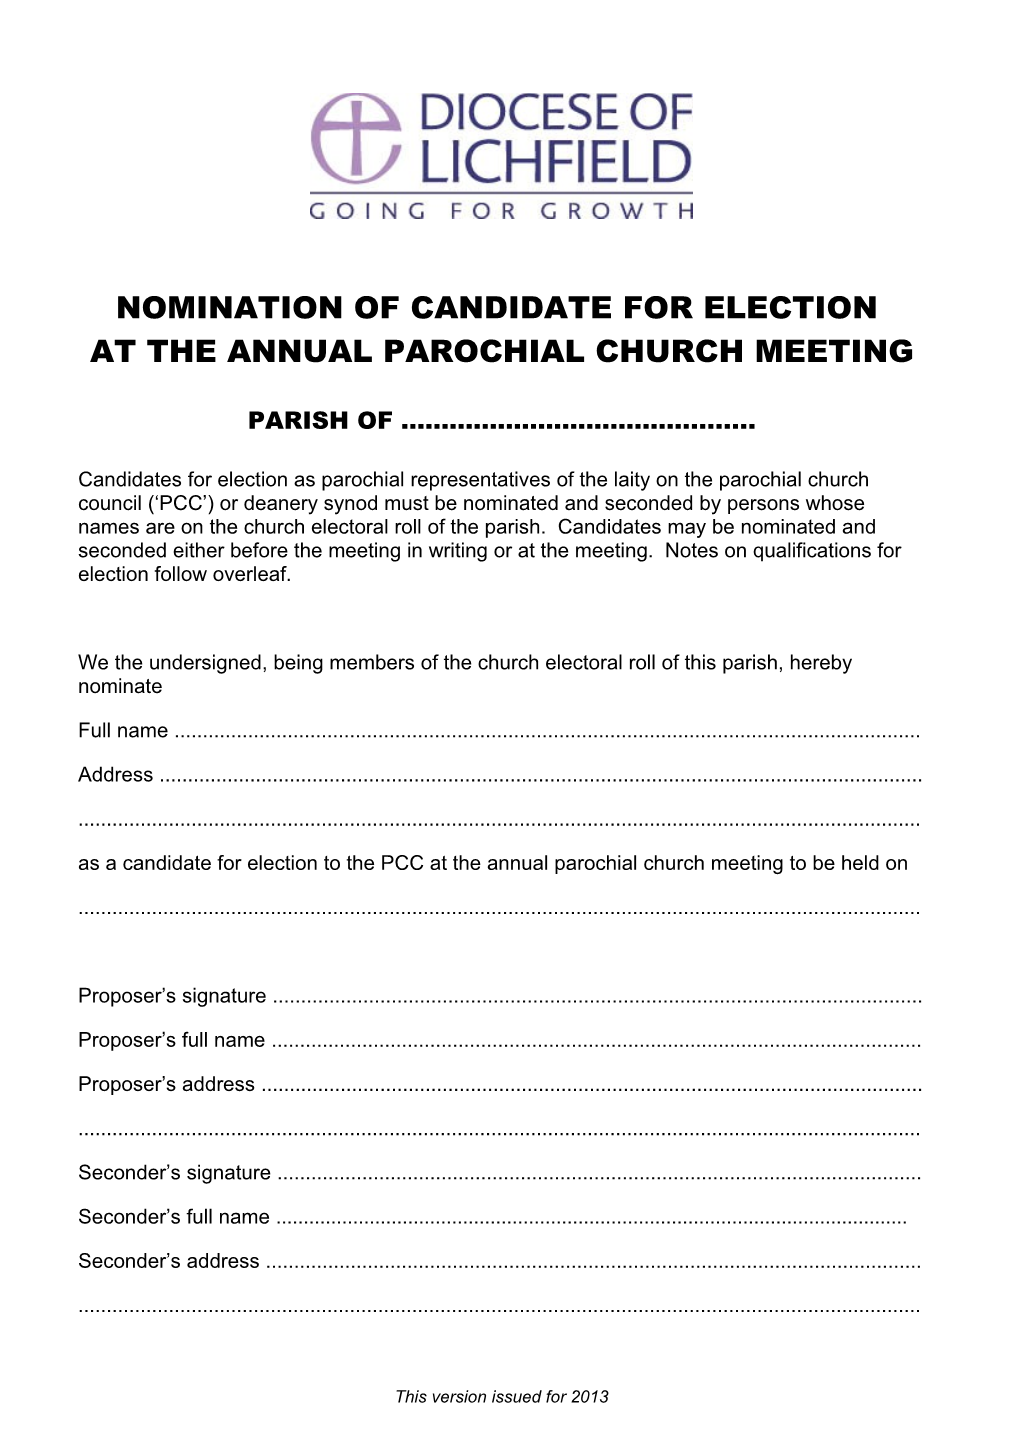 Nomination of Candidate for Election at the Annual Parochial Church Meeting